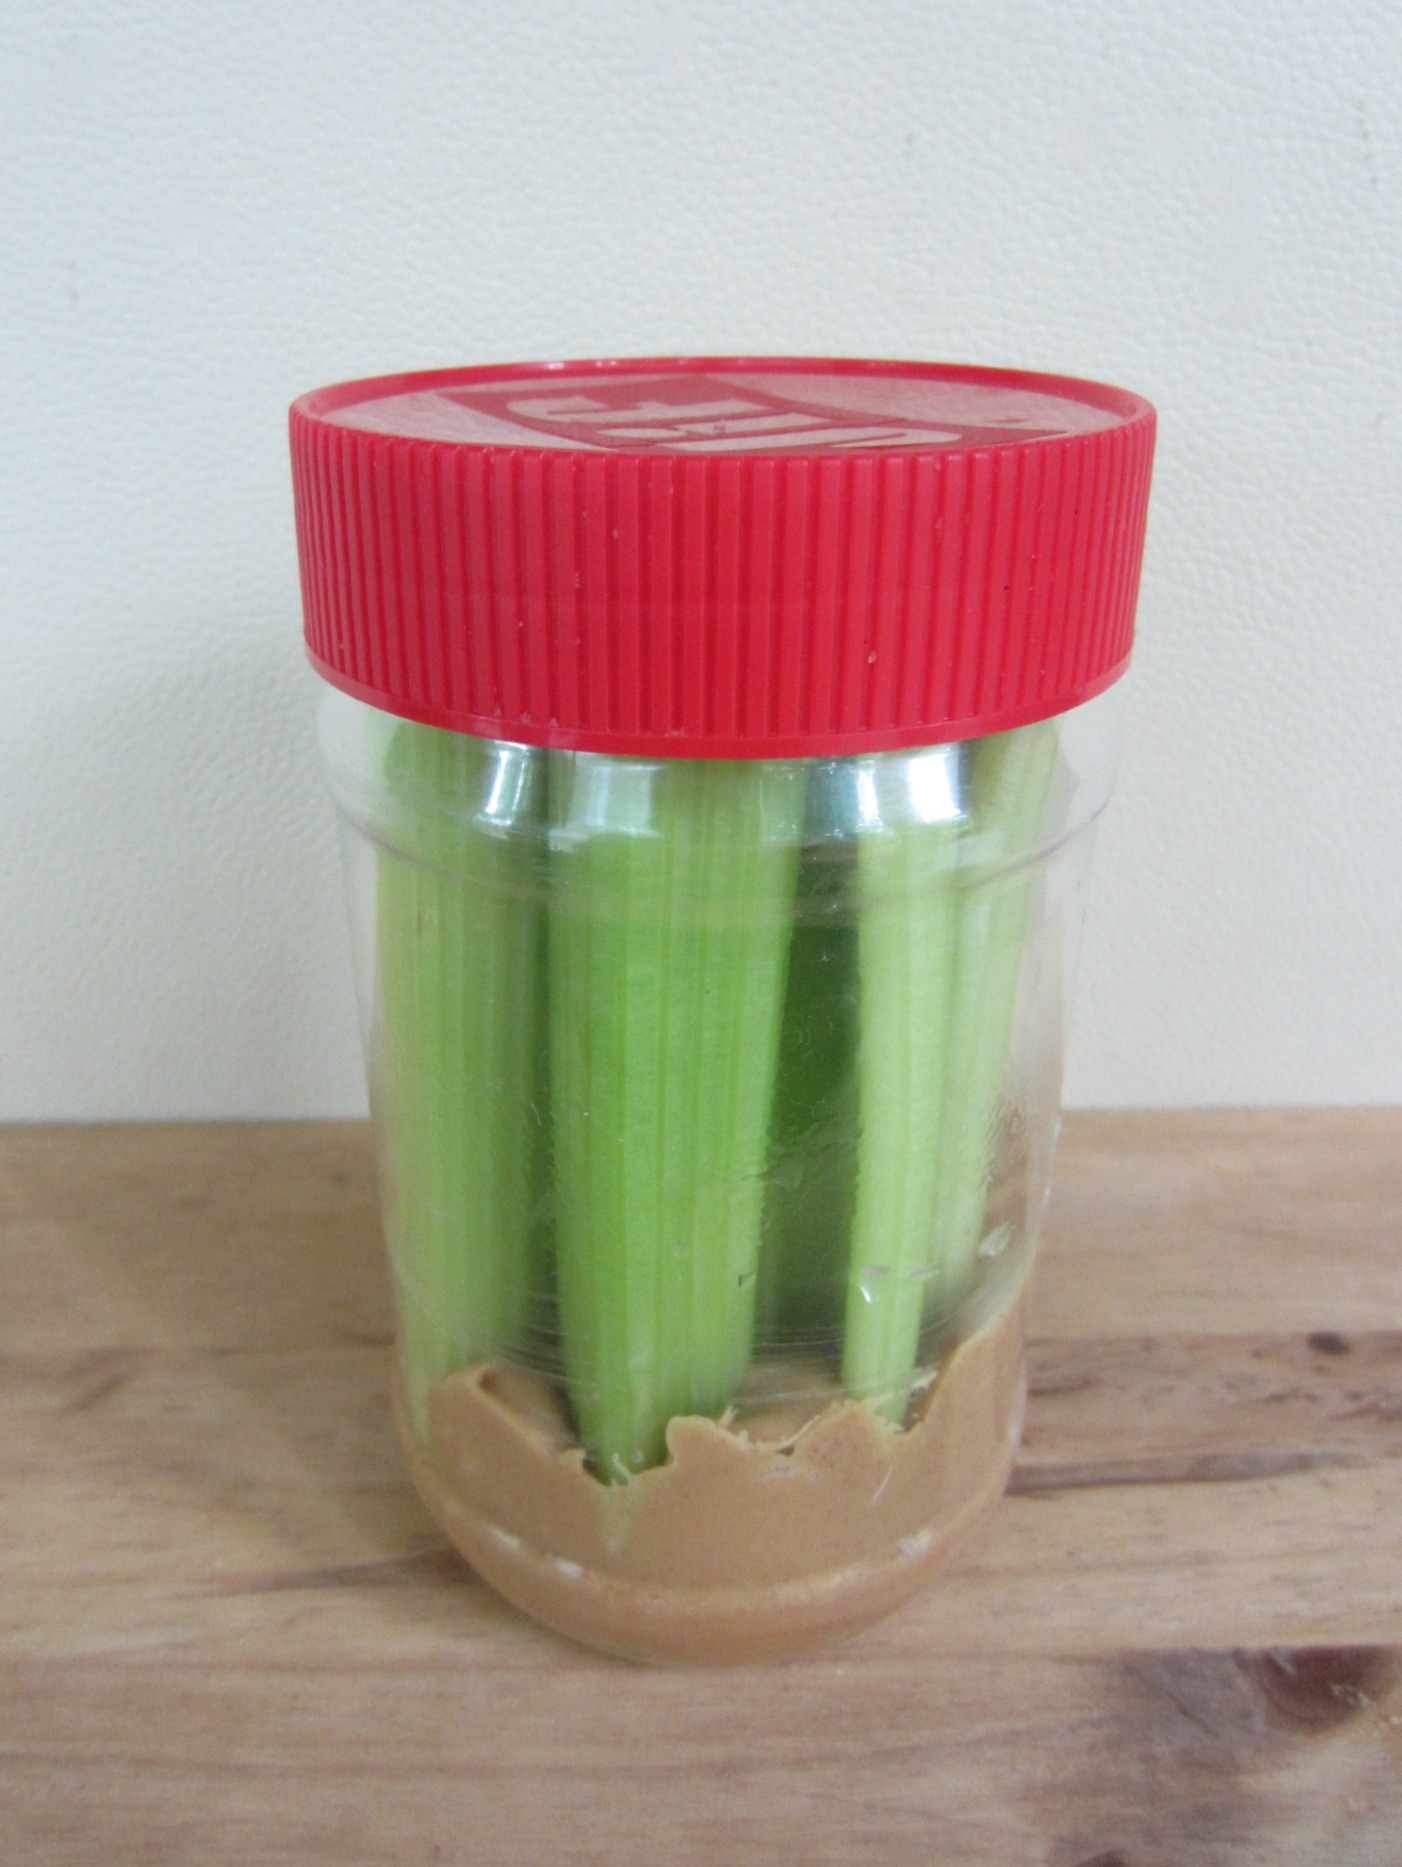 healthy snack to go - celery and peanut butter sticks